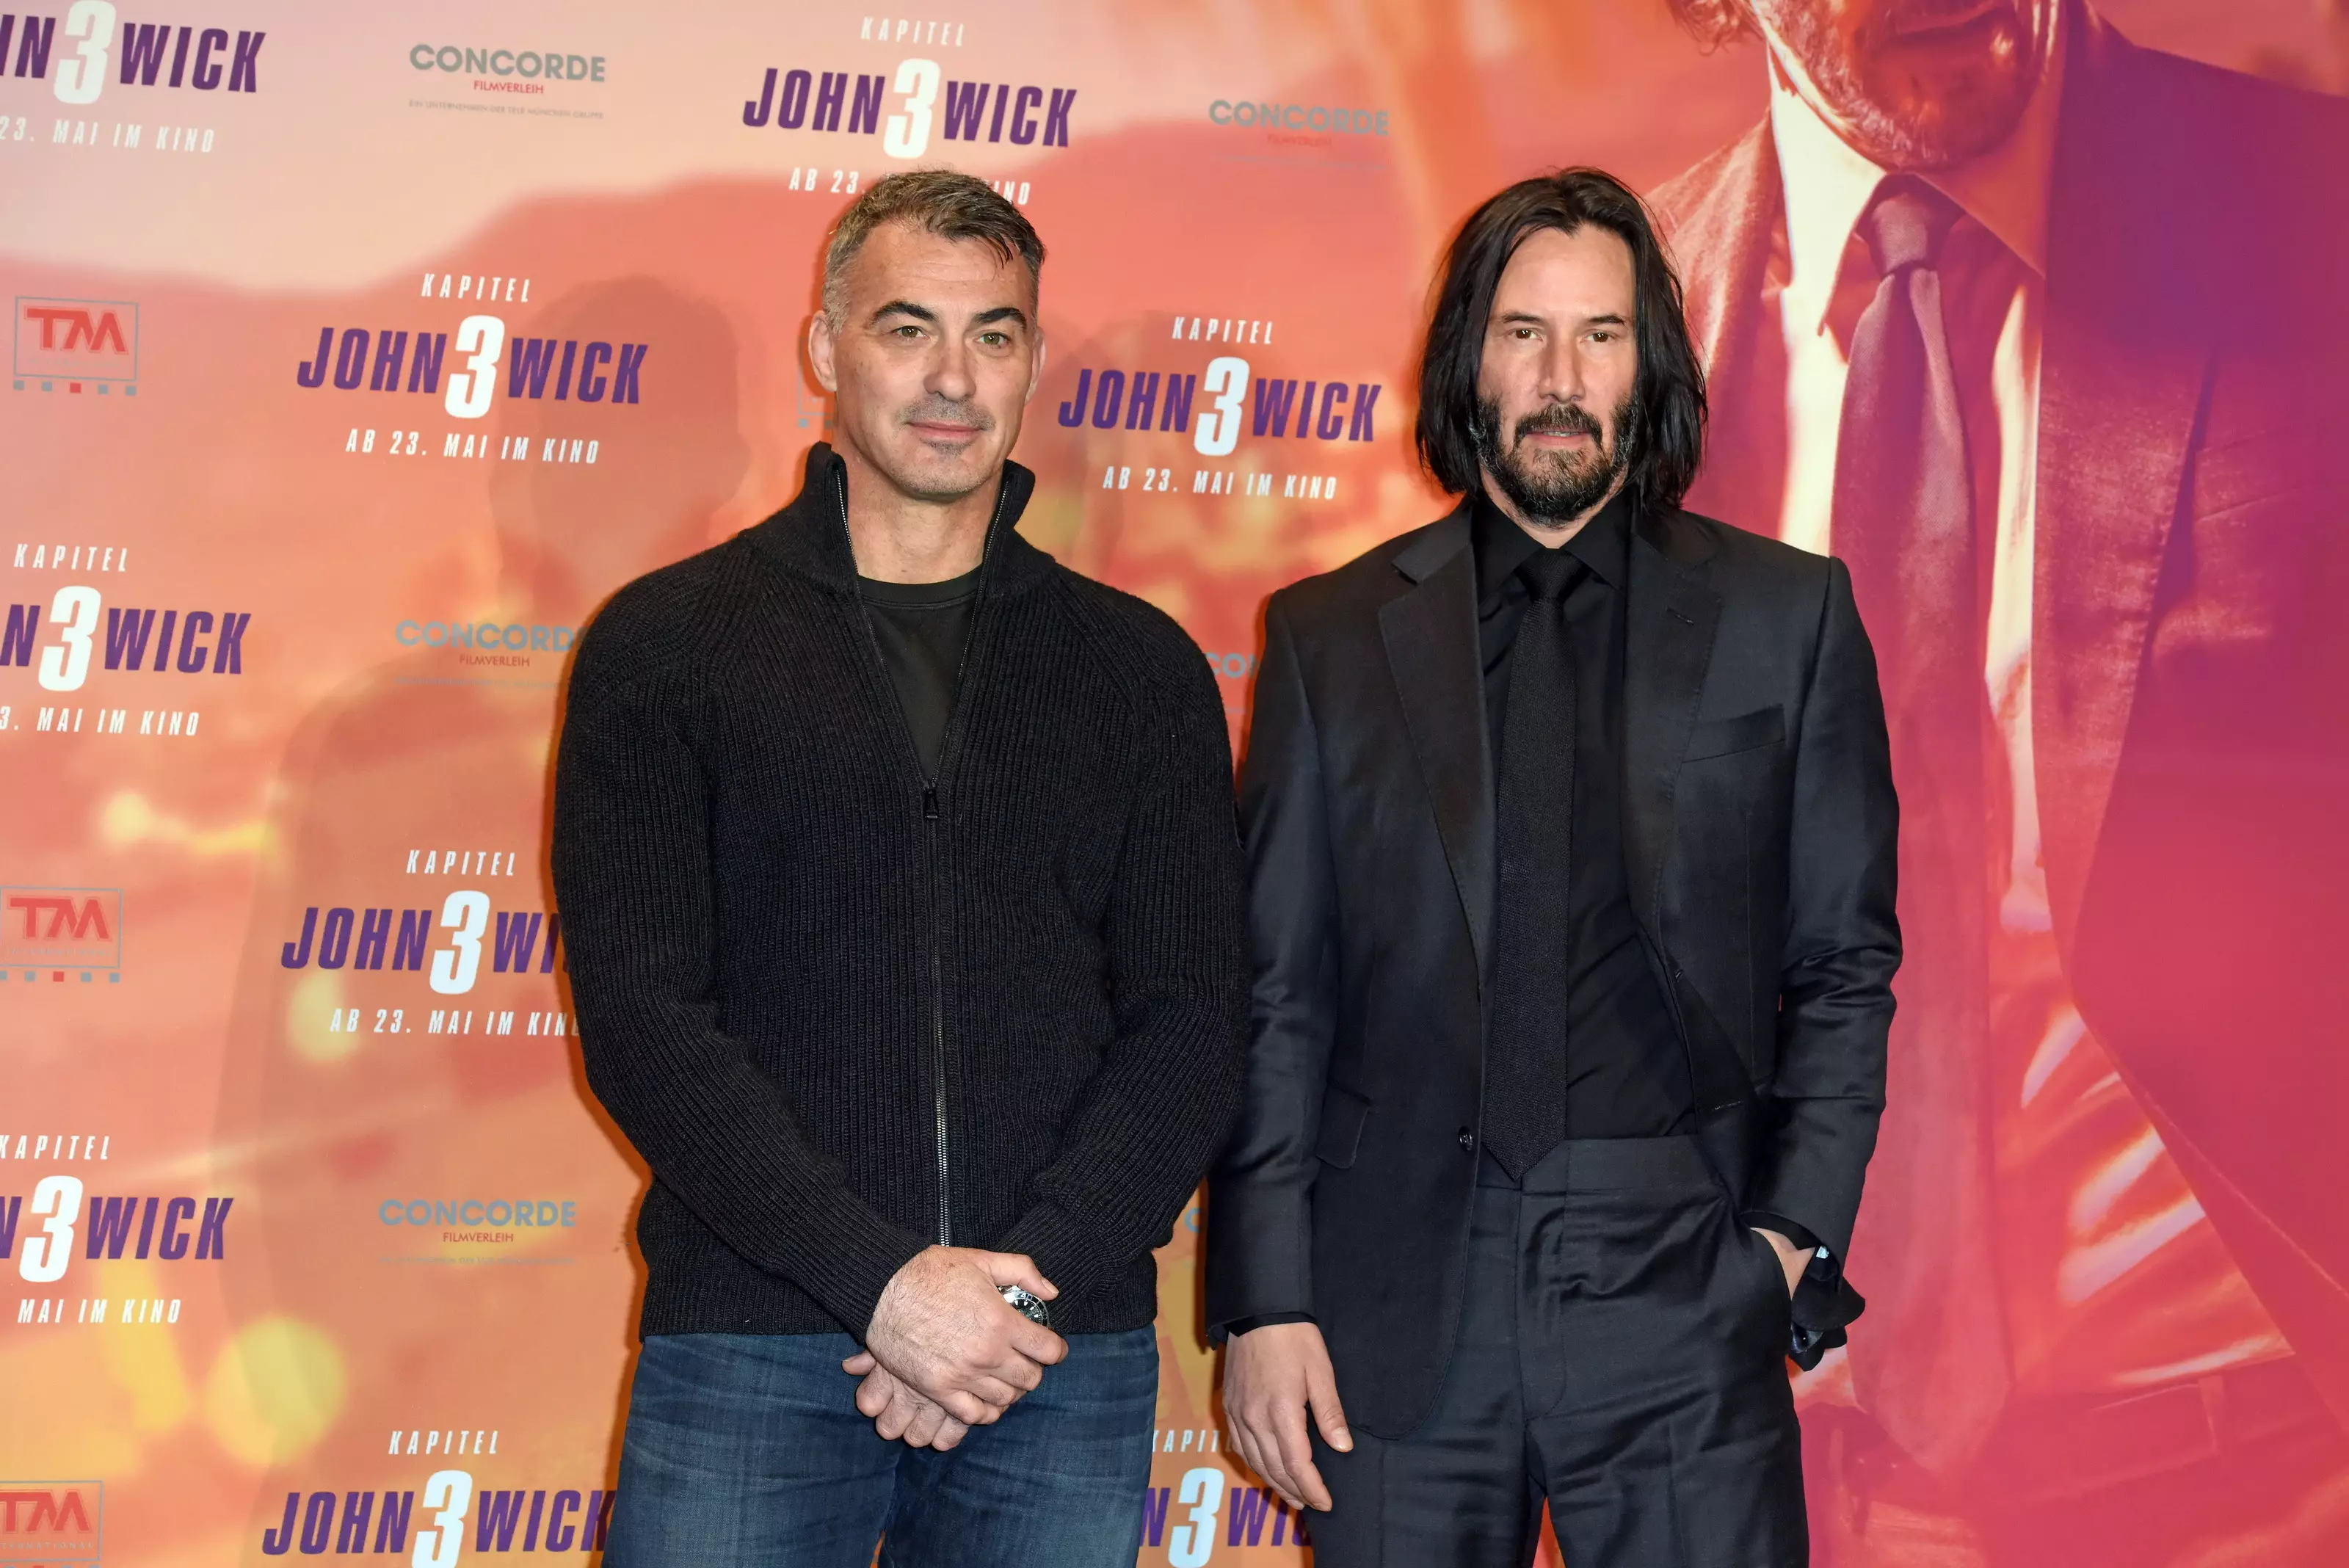 John Wick director Chad Stahelski with star Keanu Reeves.